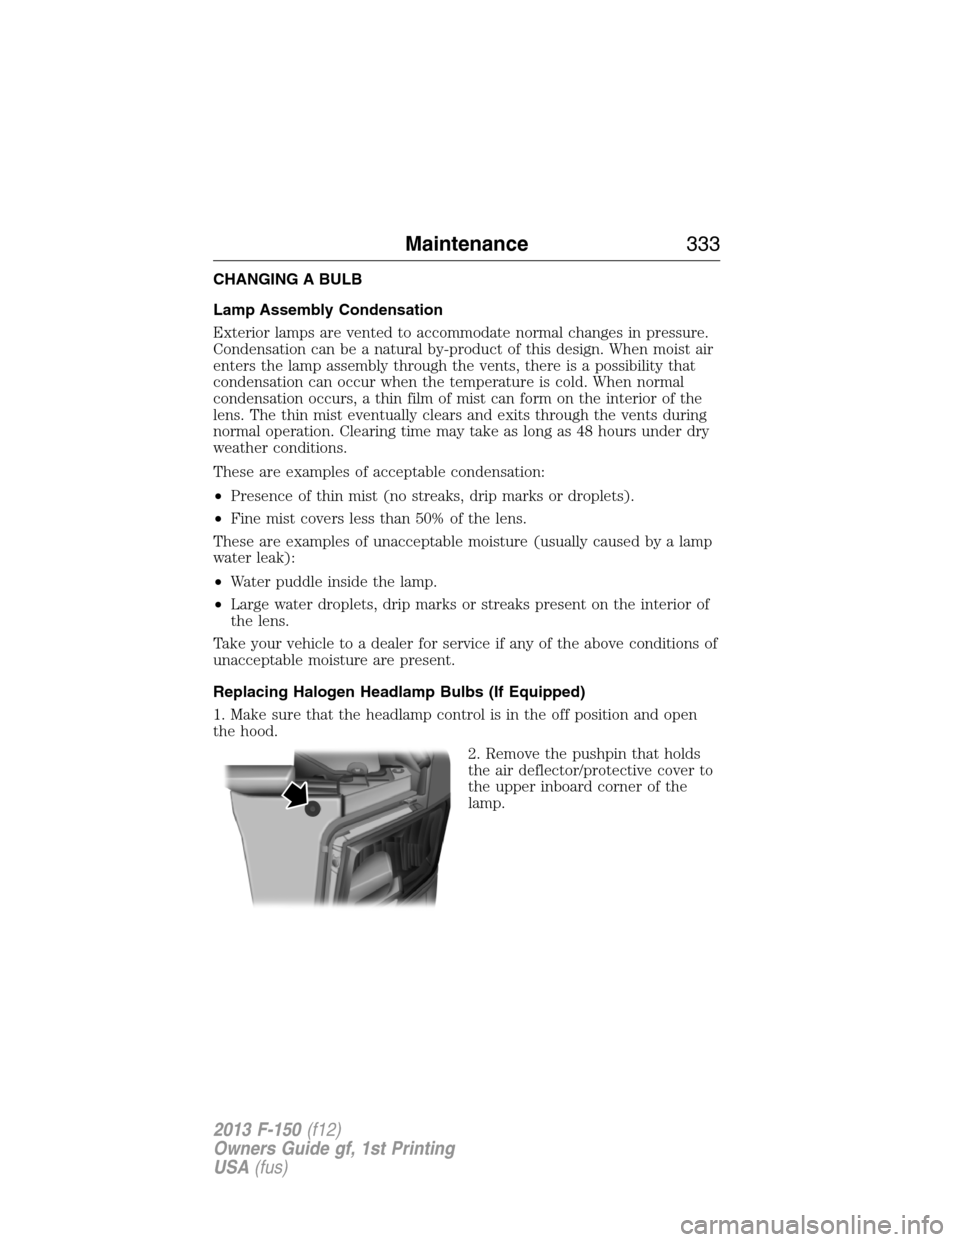 FORD F150 2013 12.G Service Manual CHANGING A BULB
Lamp Assembly Condensation
Exterior lamps are vented to accommodate normal changes in pressure.
Condensation can be a natural by-product of this design. When moist air
enters the lamp 